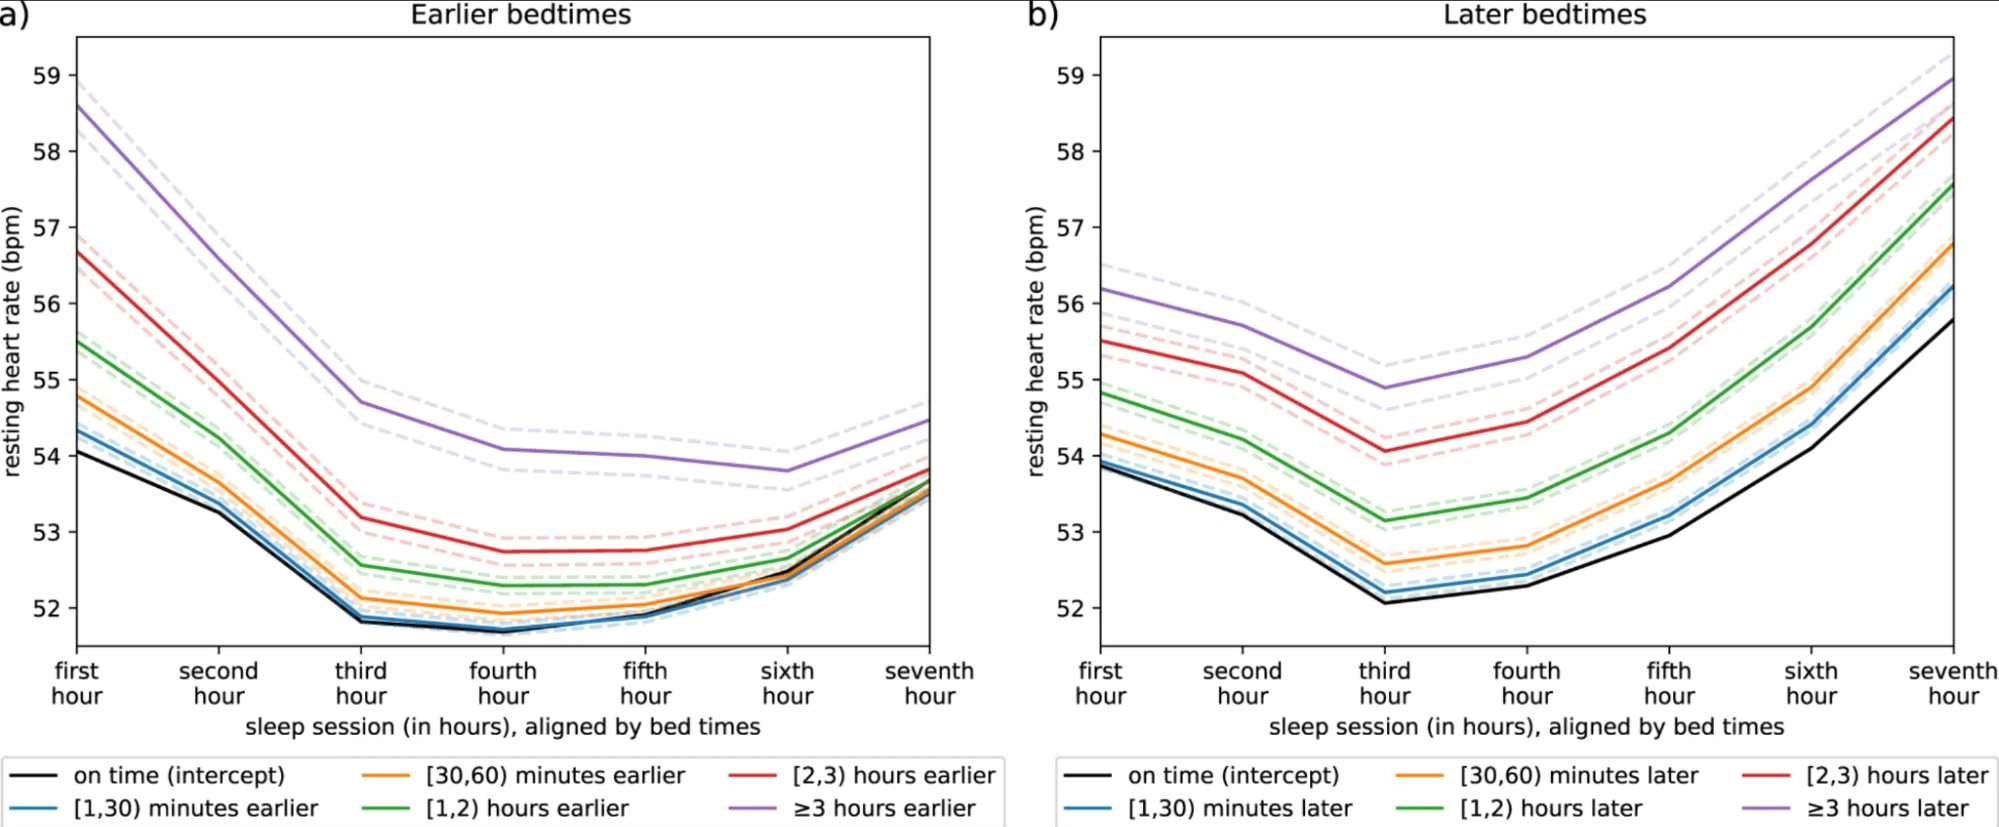 Deviations from normal bedtimes are associated with short-term increases in resting heart rate